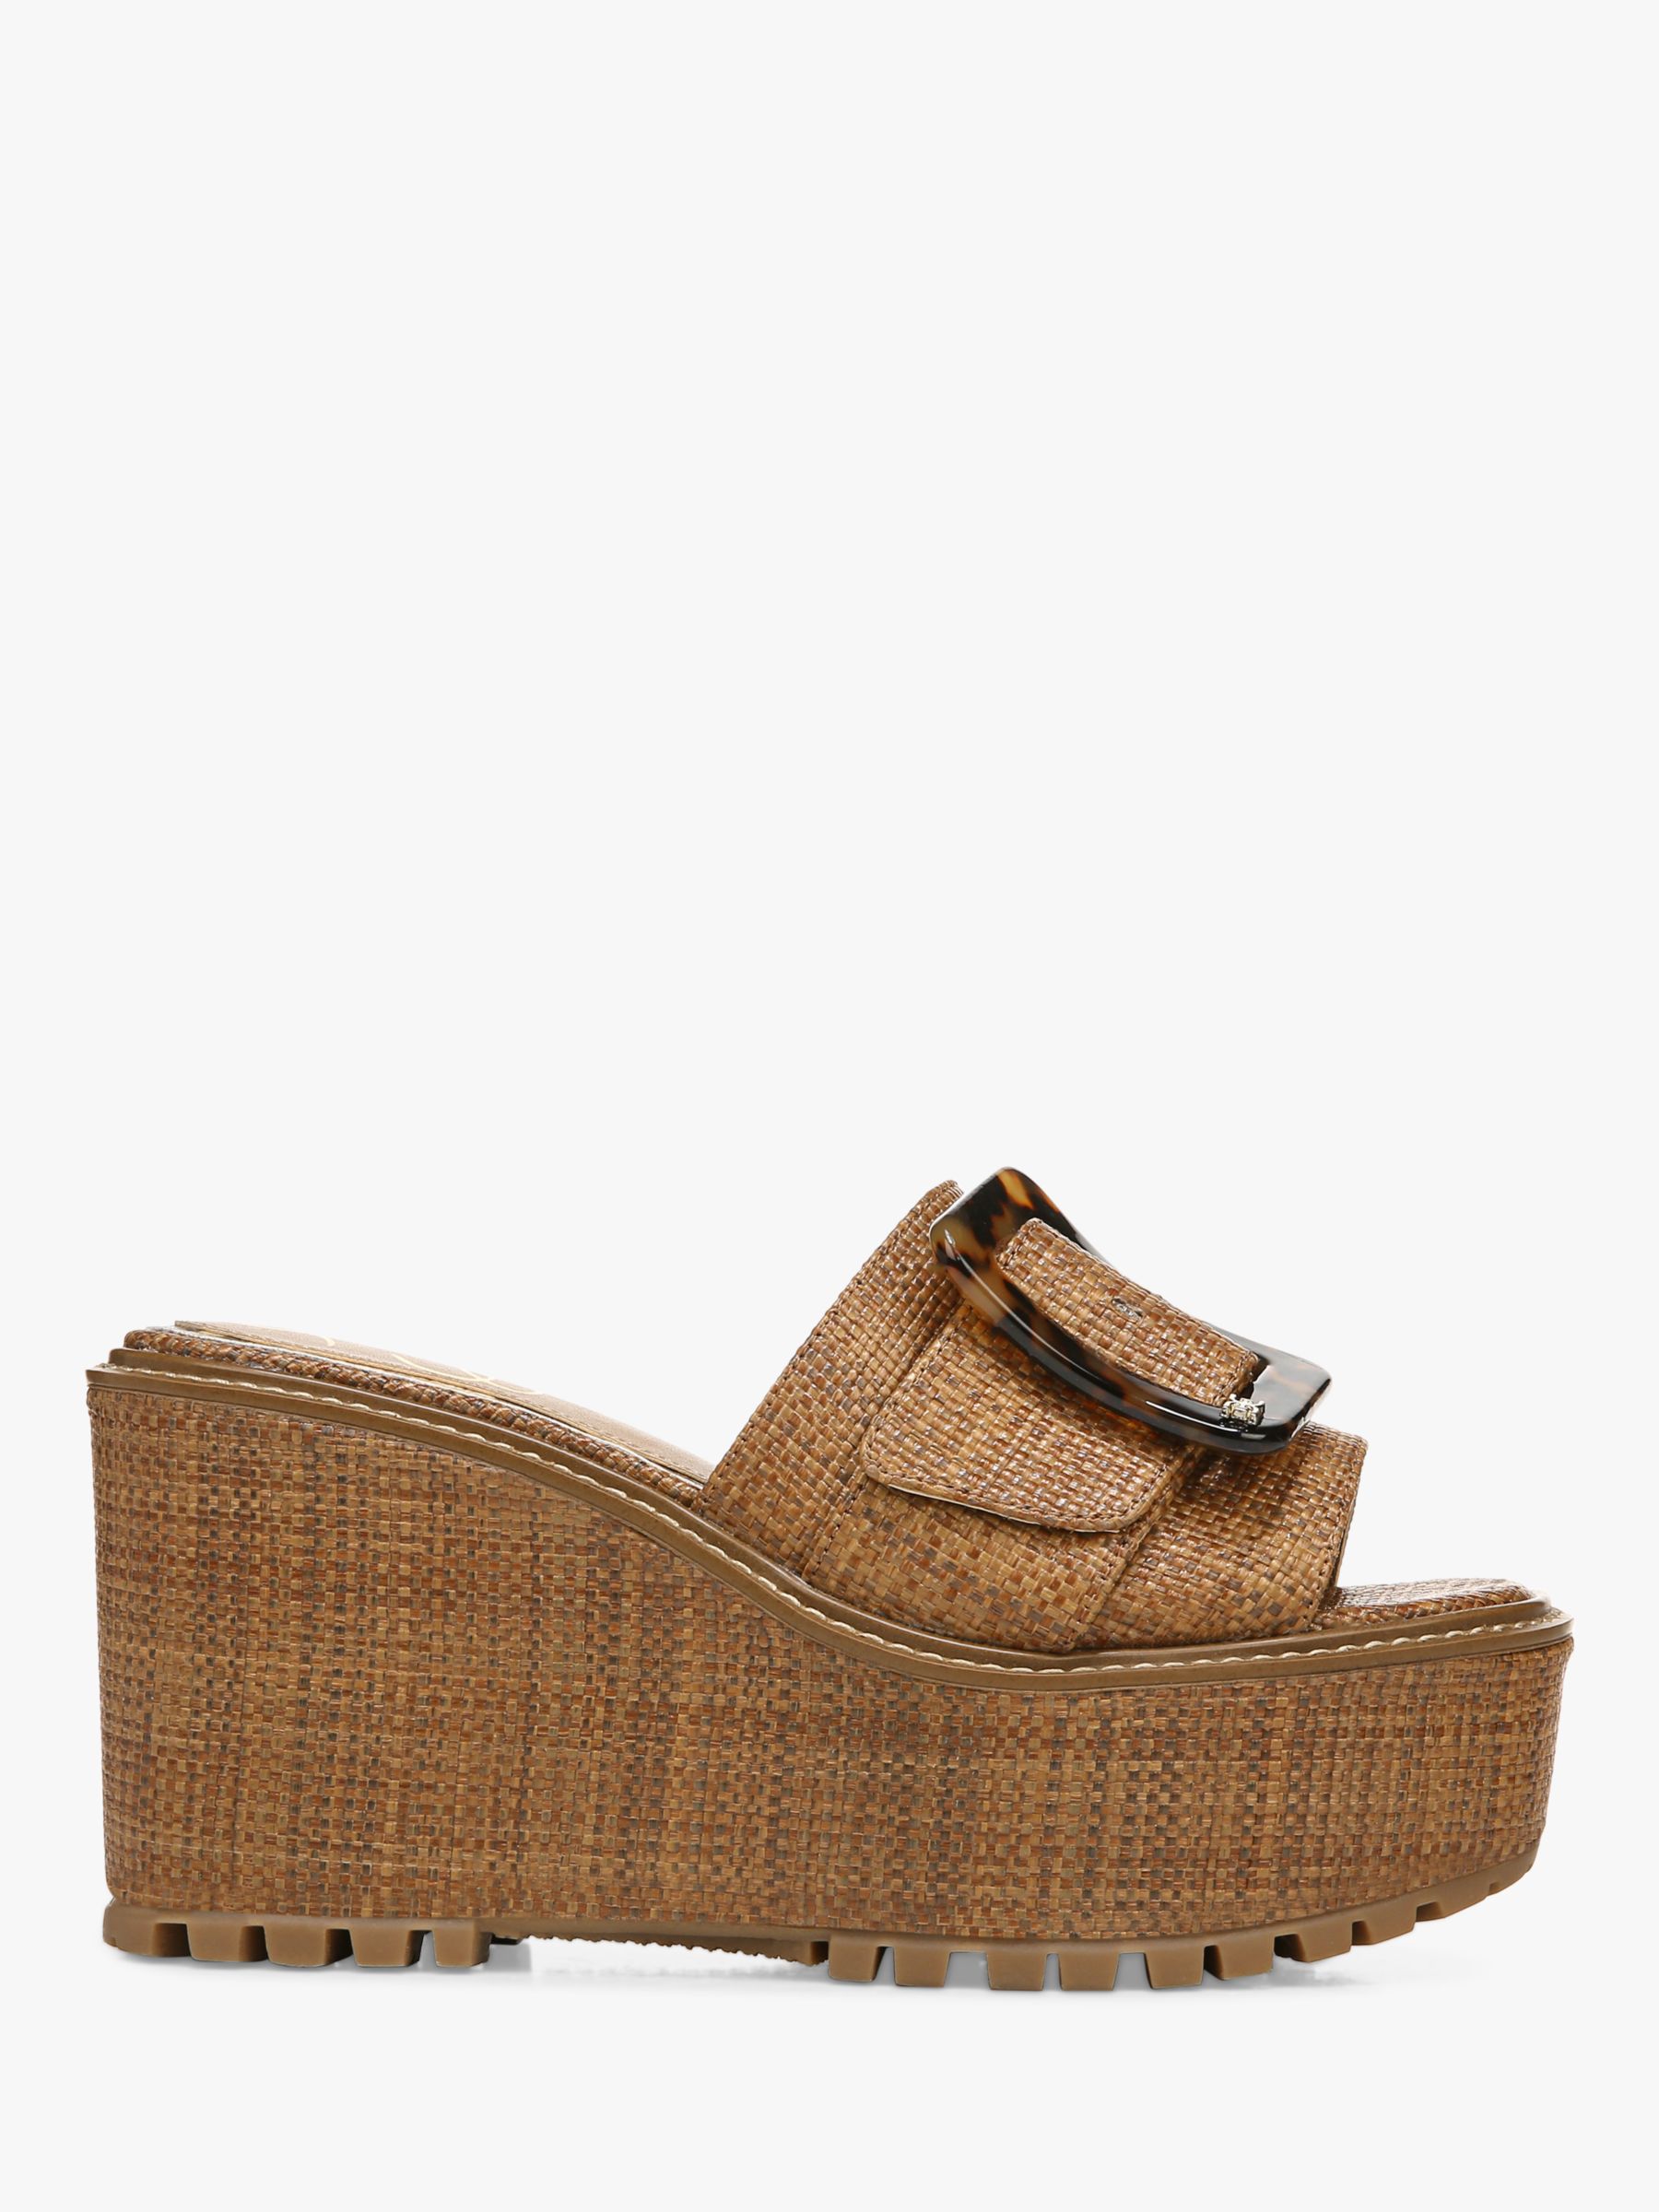 Sam Edelman Livi Wedge Heel Sandals Cuoio Cuoio At John Lewis And Partners